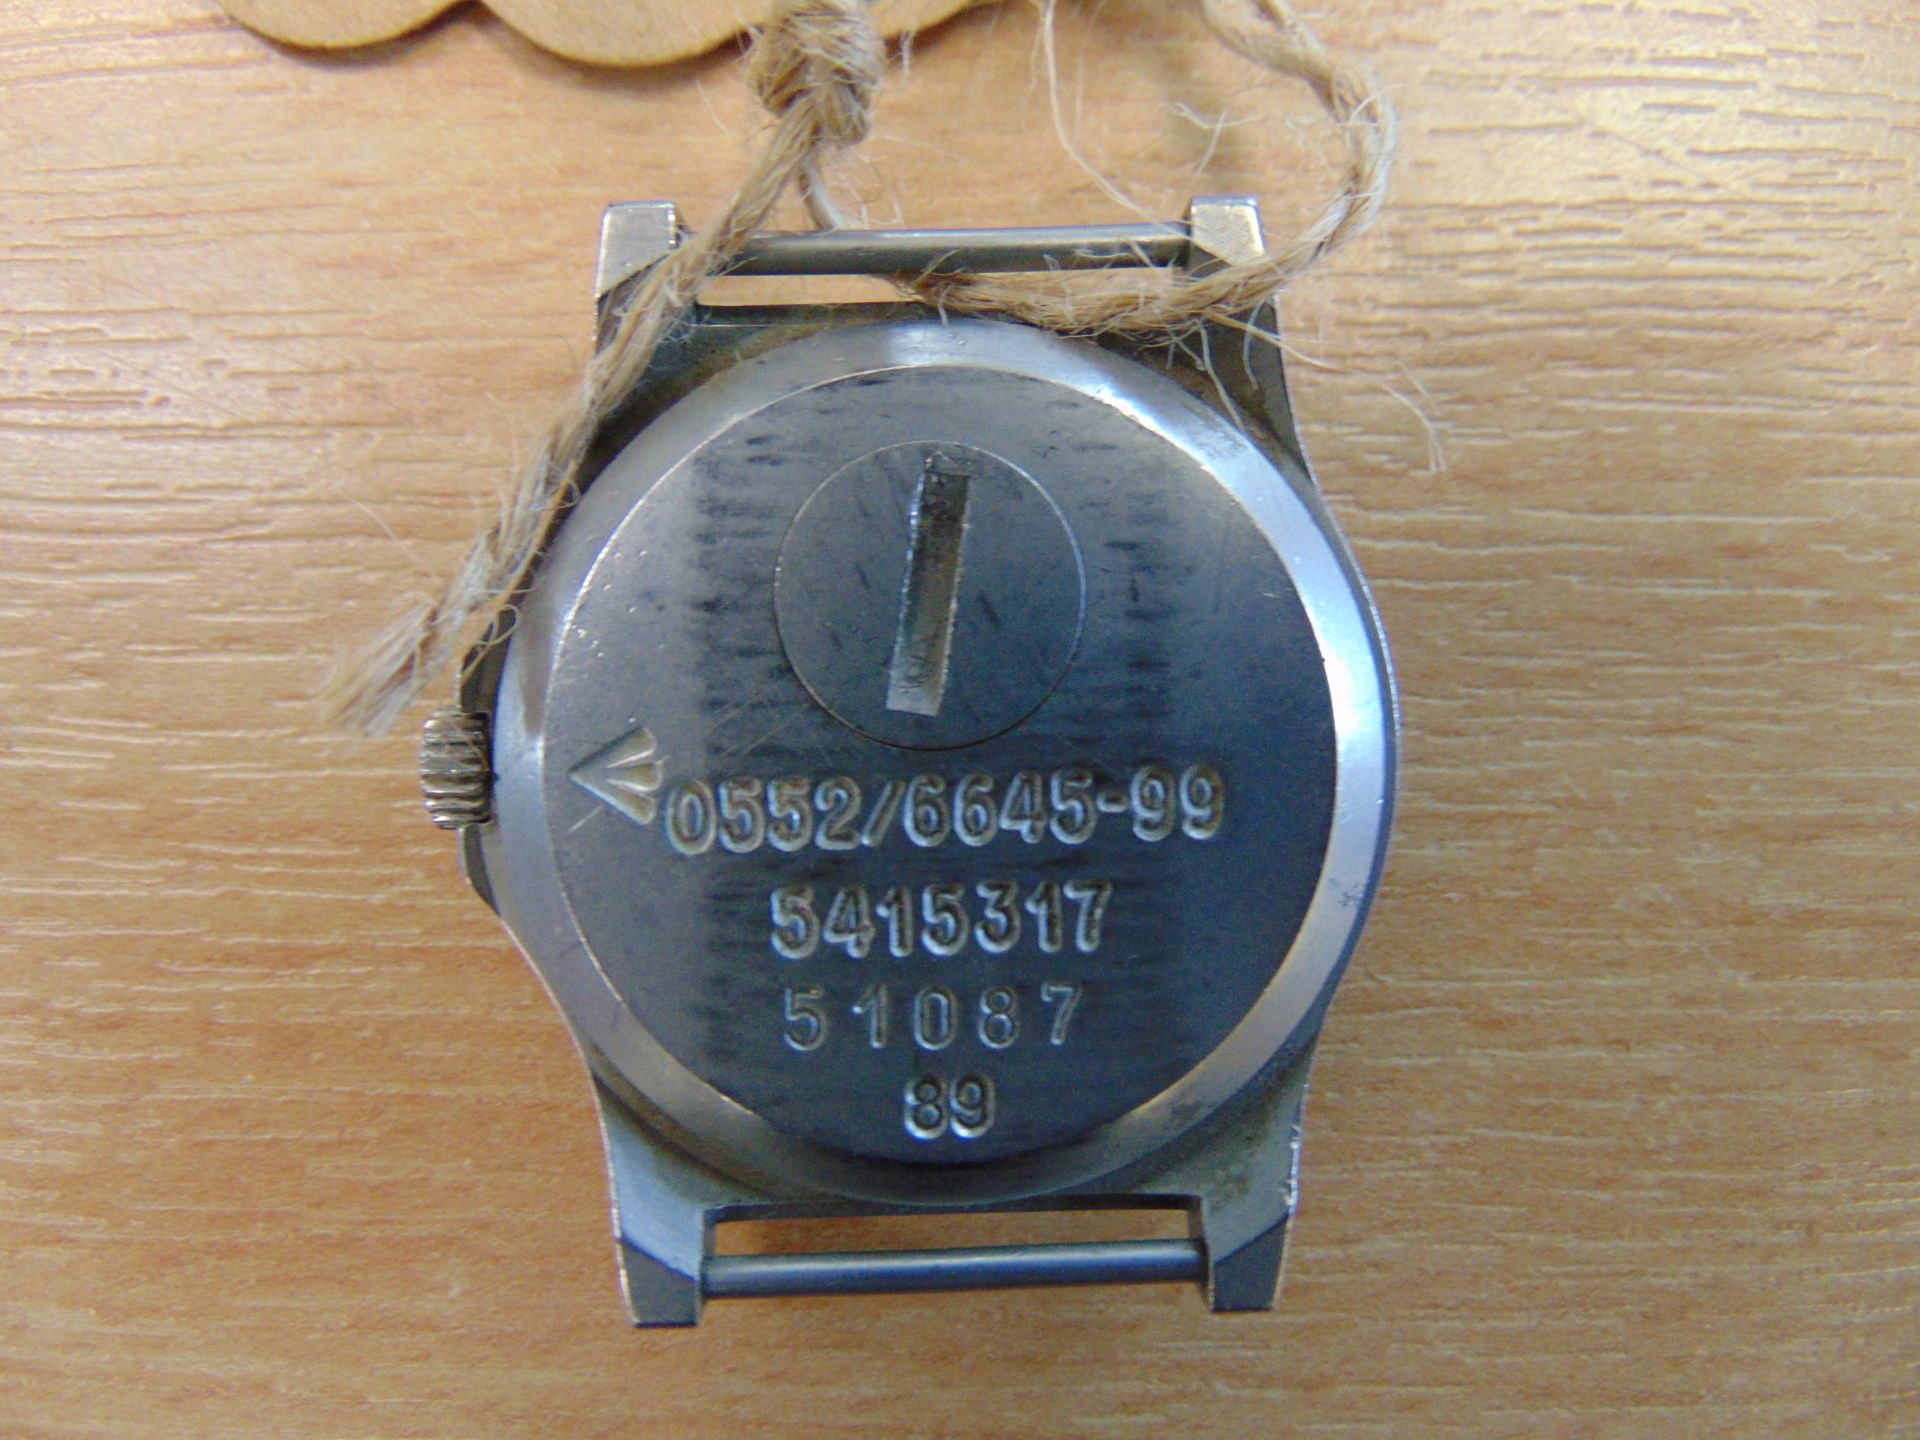 CWC 0552 Royal Marines / Navy Service Watch Nato Marks, Date 1989 - Image 3 of 4